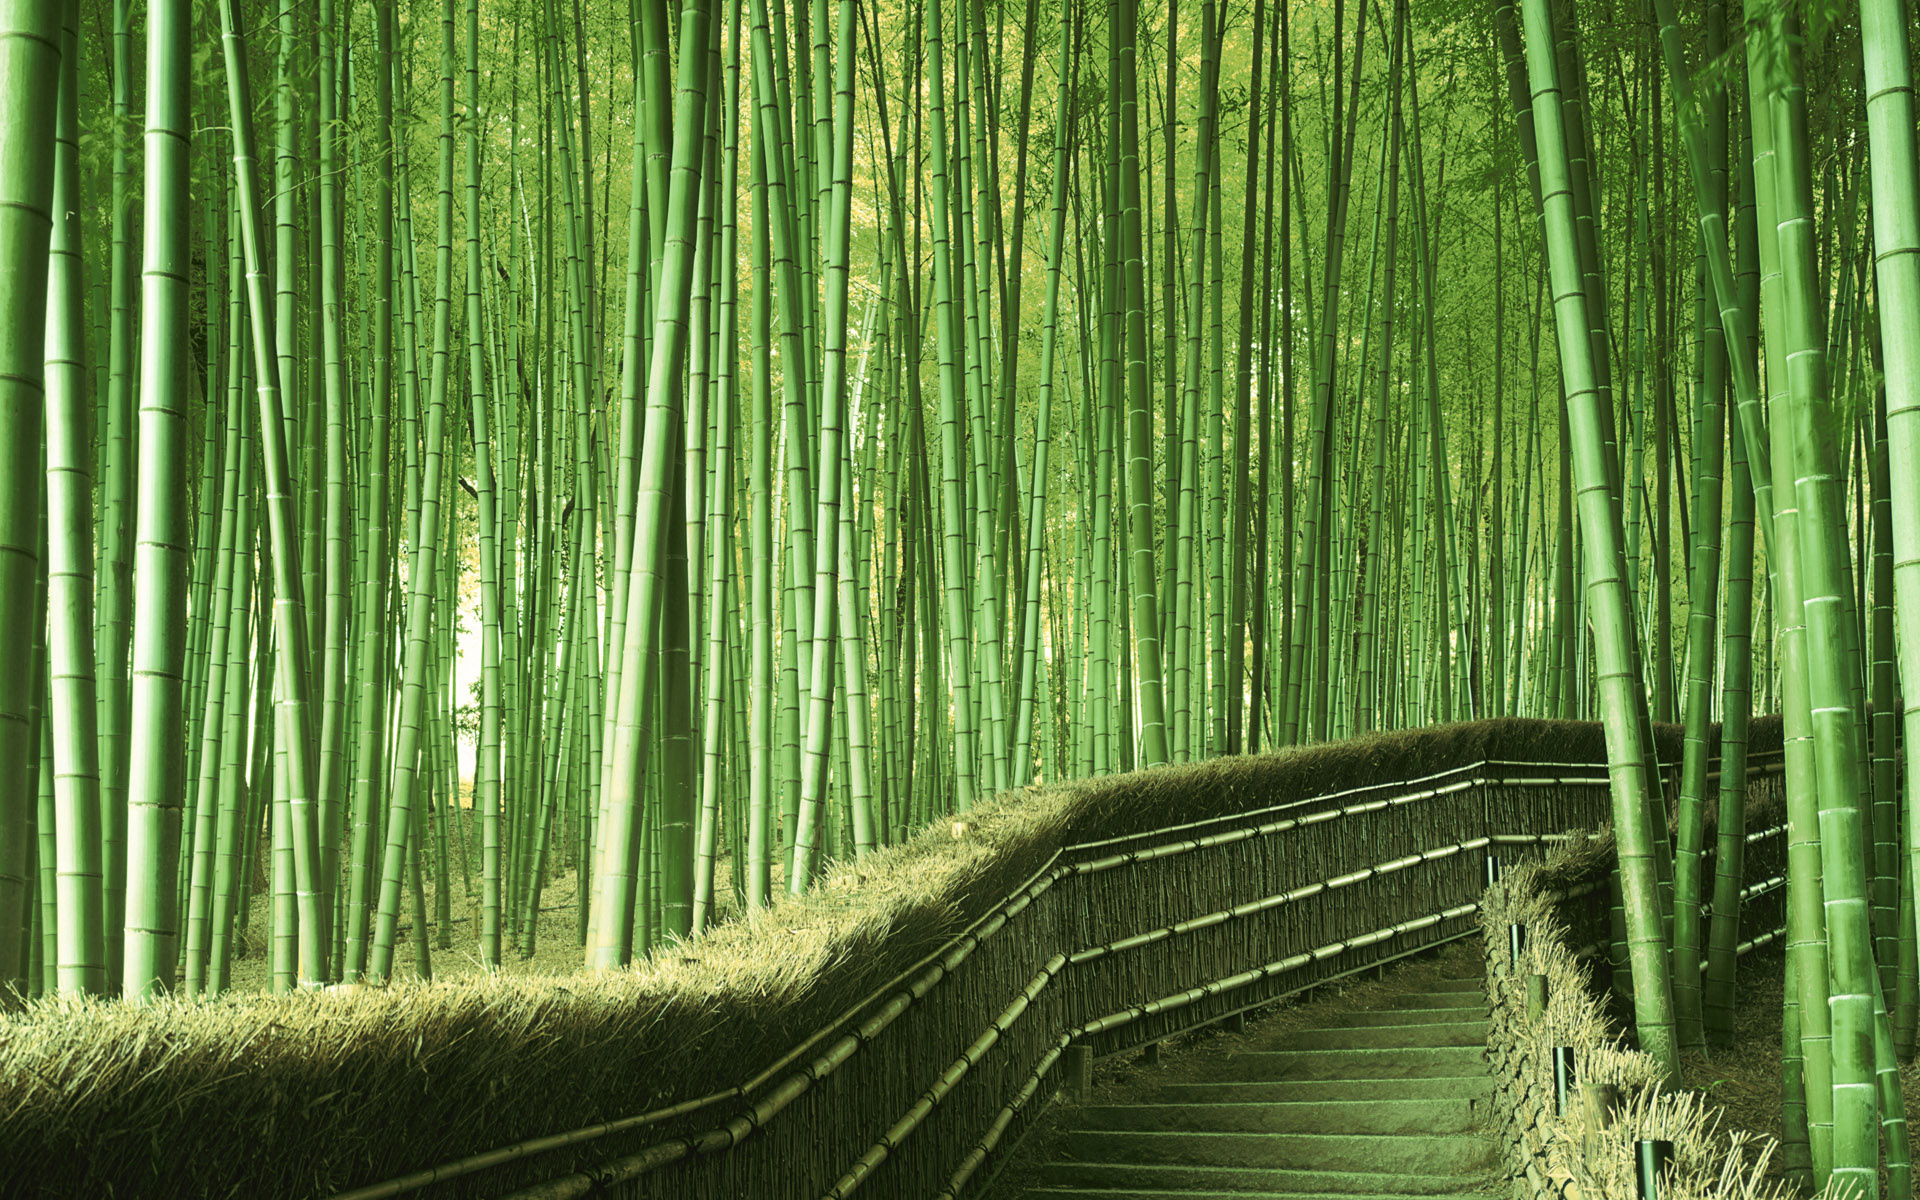 Bamboo: An arborescent grass of tropical and temperate regions with hollow stems. 1920x1200 HD Wallpaper.